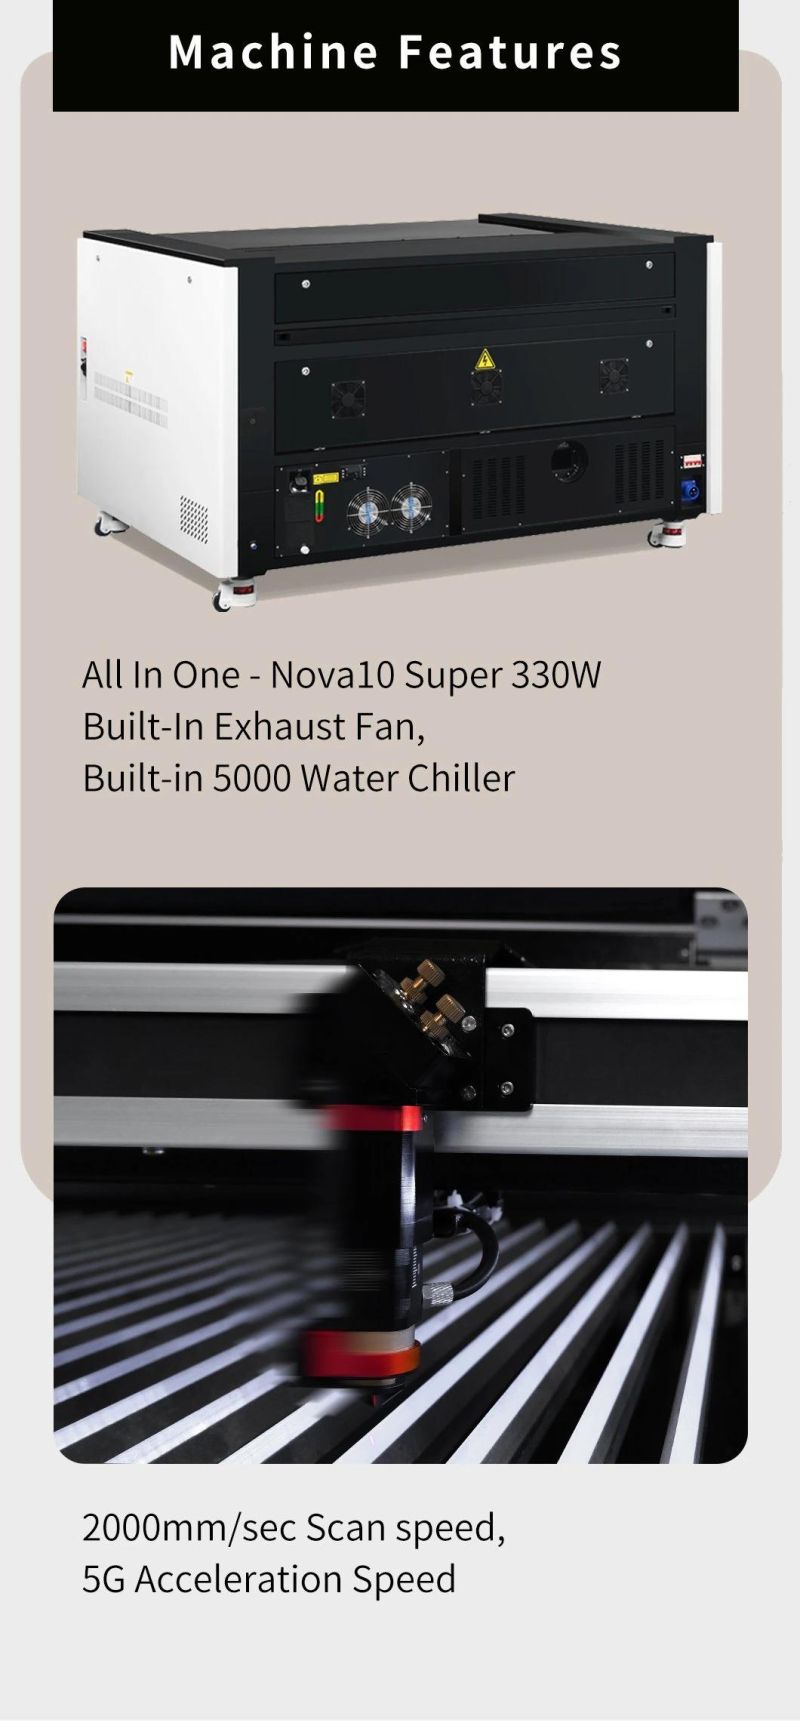 Newest Laser Subsurface Engraving Machine 80W 100W RF30W/60W 1070 for Wood Acrylic Glass Plastic Leather with Integrated Autofocus WiFi Lightburn Software